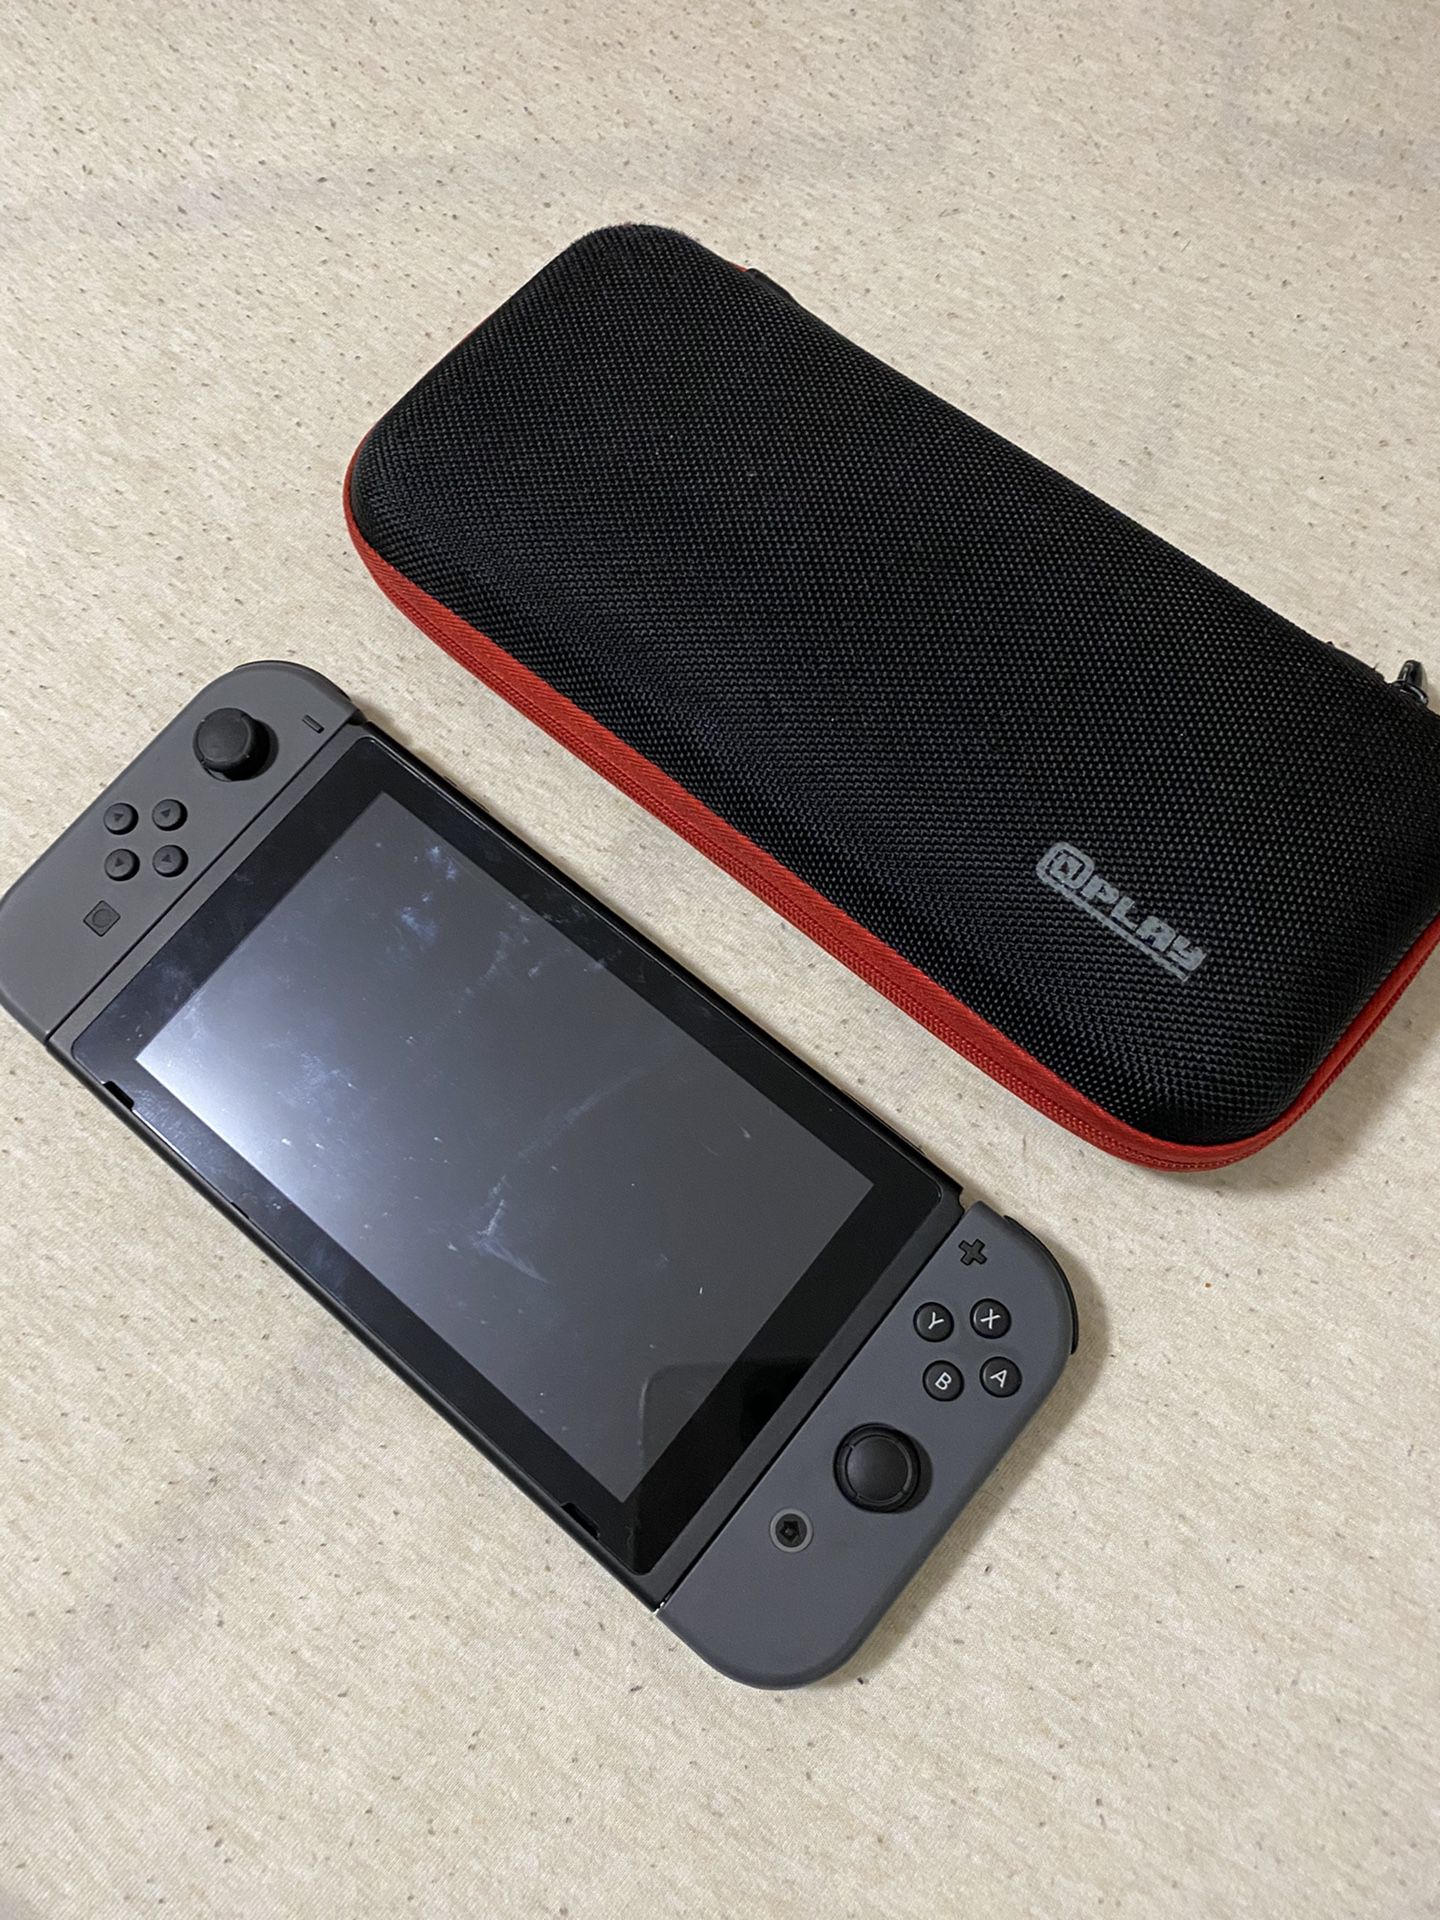 Nintendo switch with box and case like NEW